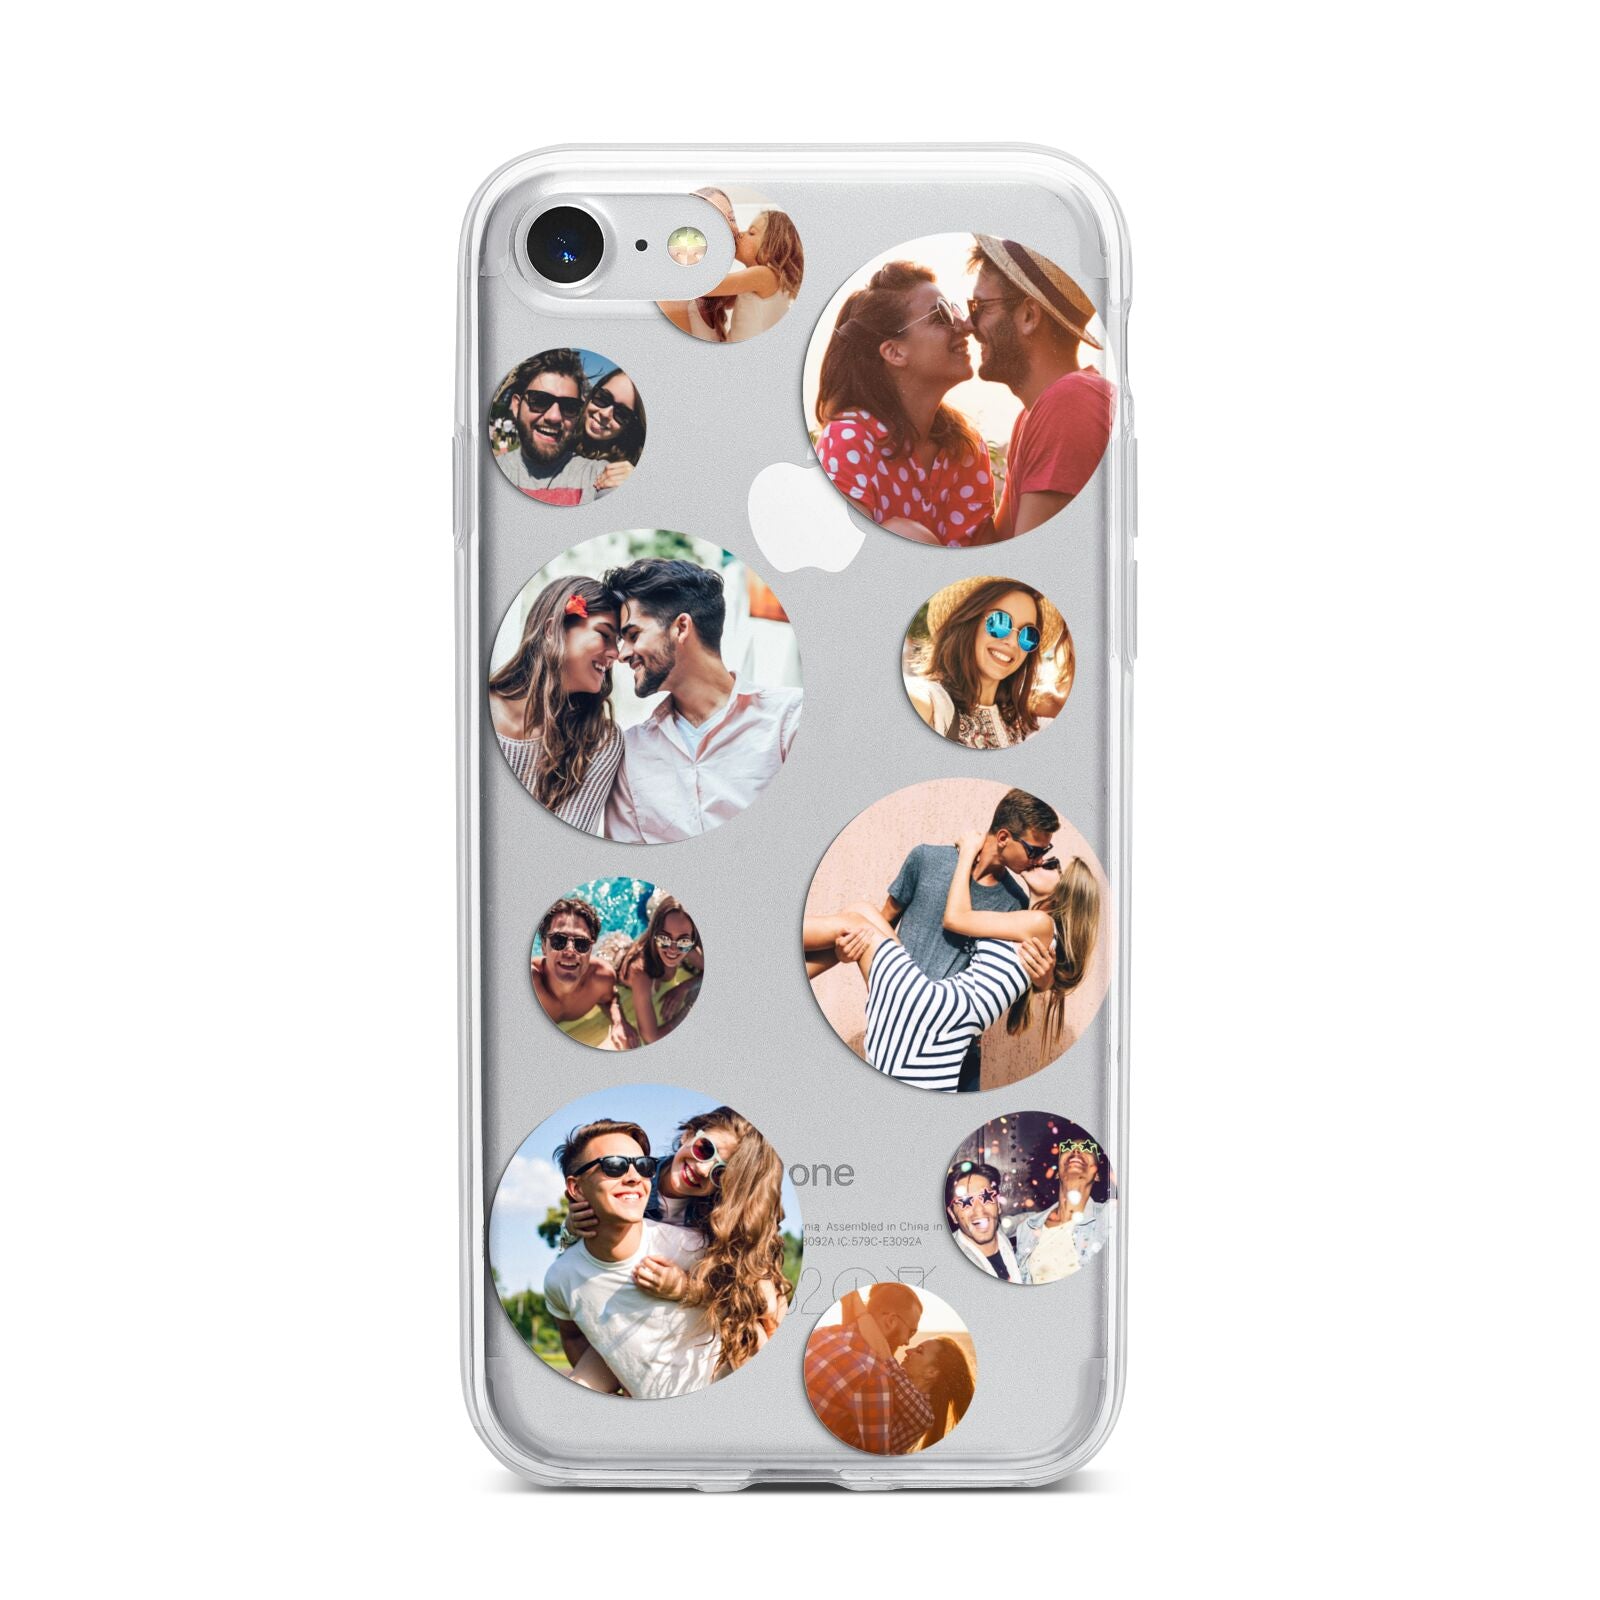 Multi Circular Photo Collage Upload iPhone 7 Bumper Case on Silver iPhone